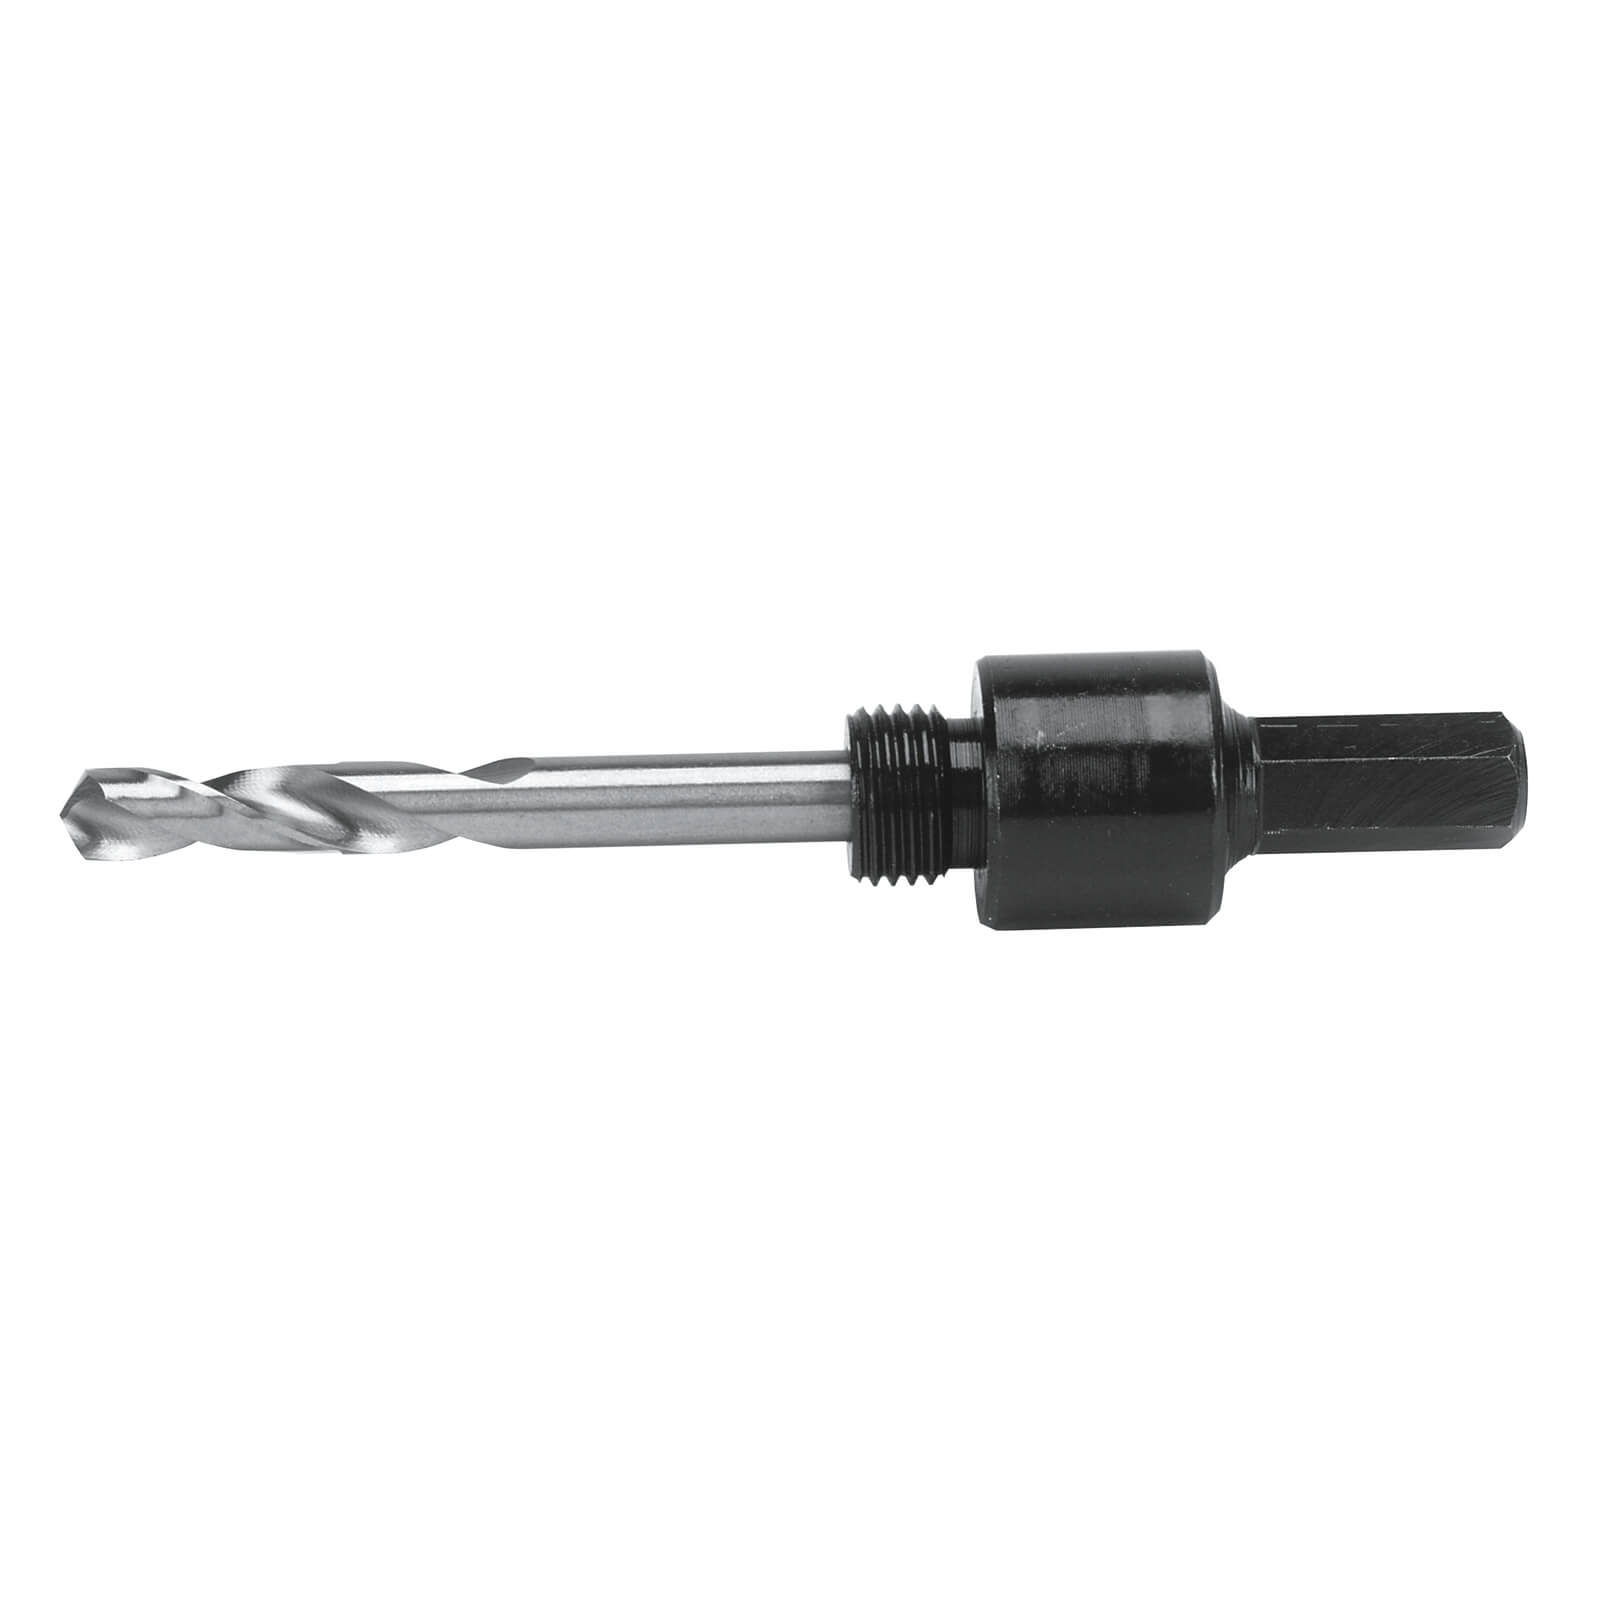 Photo of Irwin Arbor -mandrel- - 9.5mm- Fits Hole Saws 14-30mm